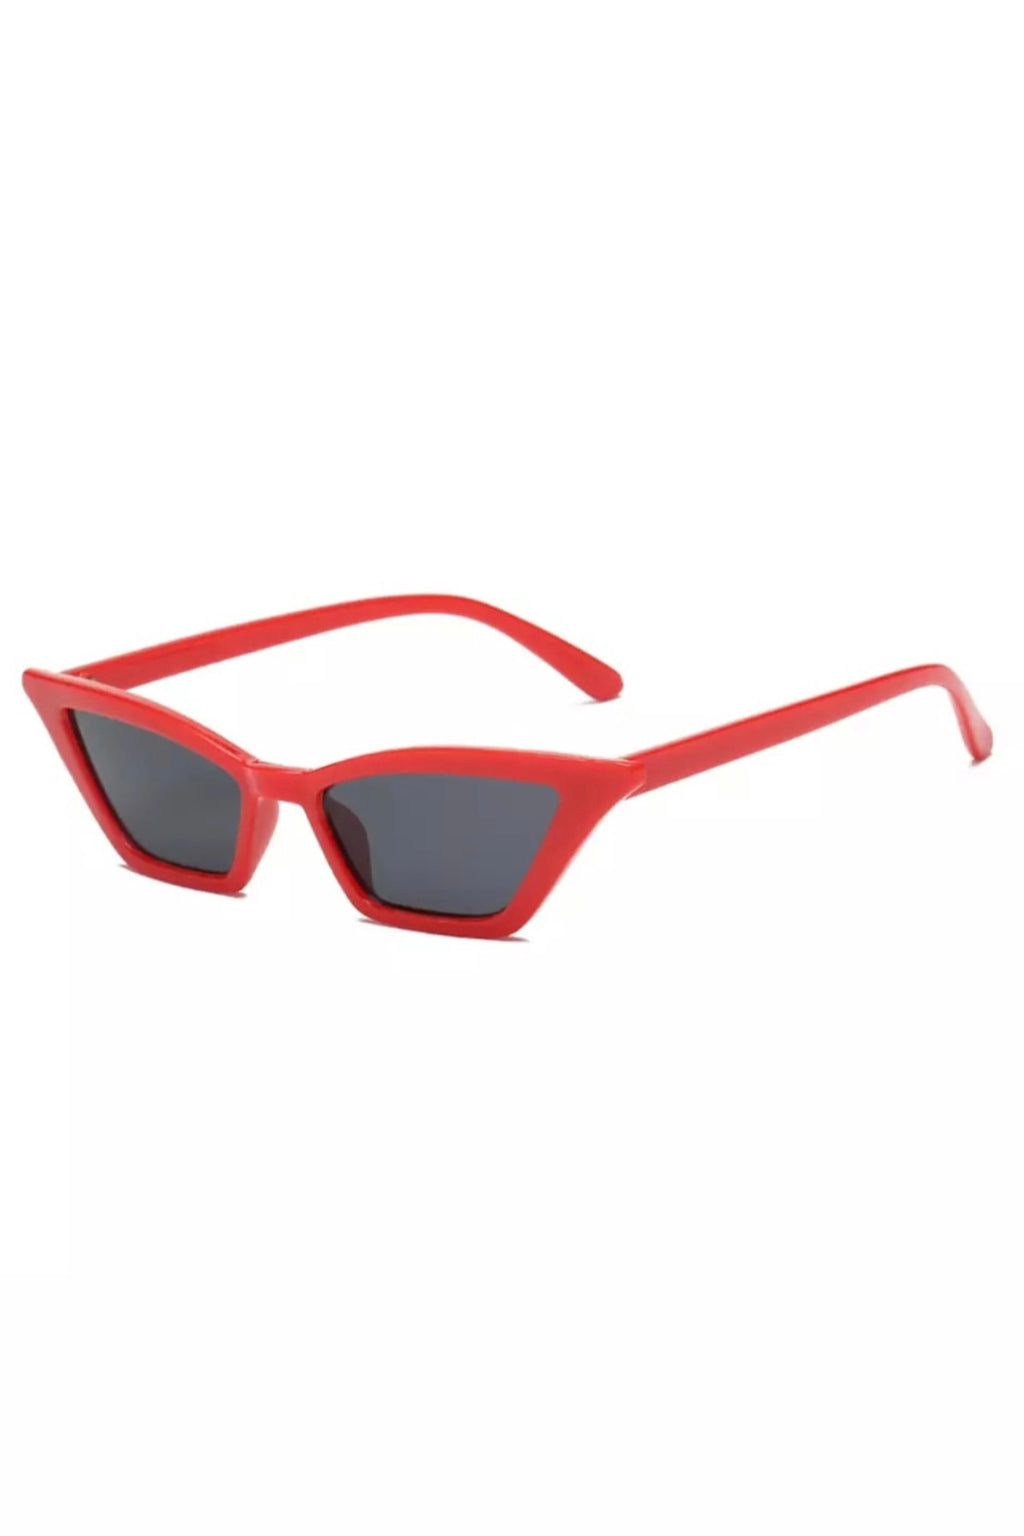 RED AND BLACK VINTAGE SUNGLASSES